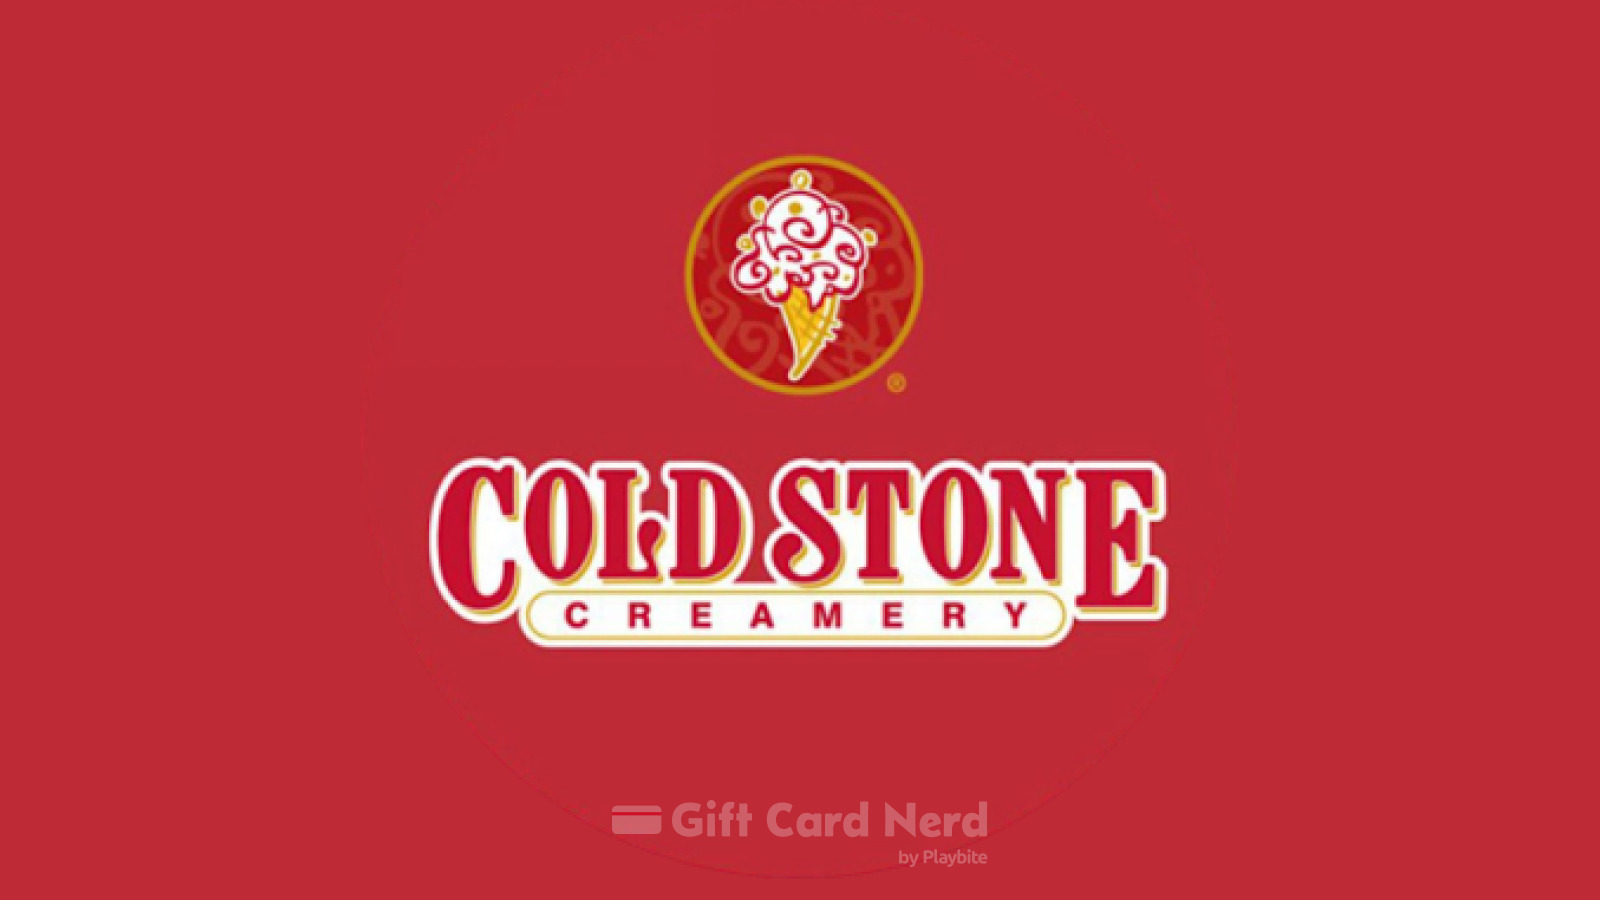 Can I Use a Cold Stone Creamery Gift Card on Paypal?